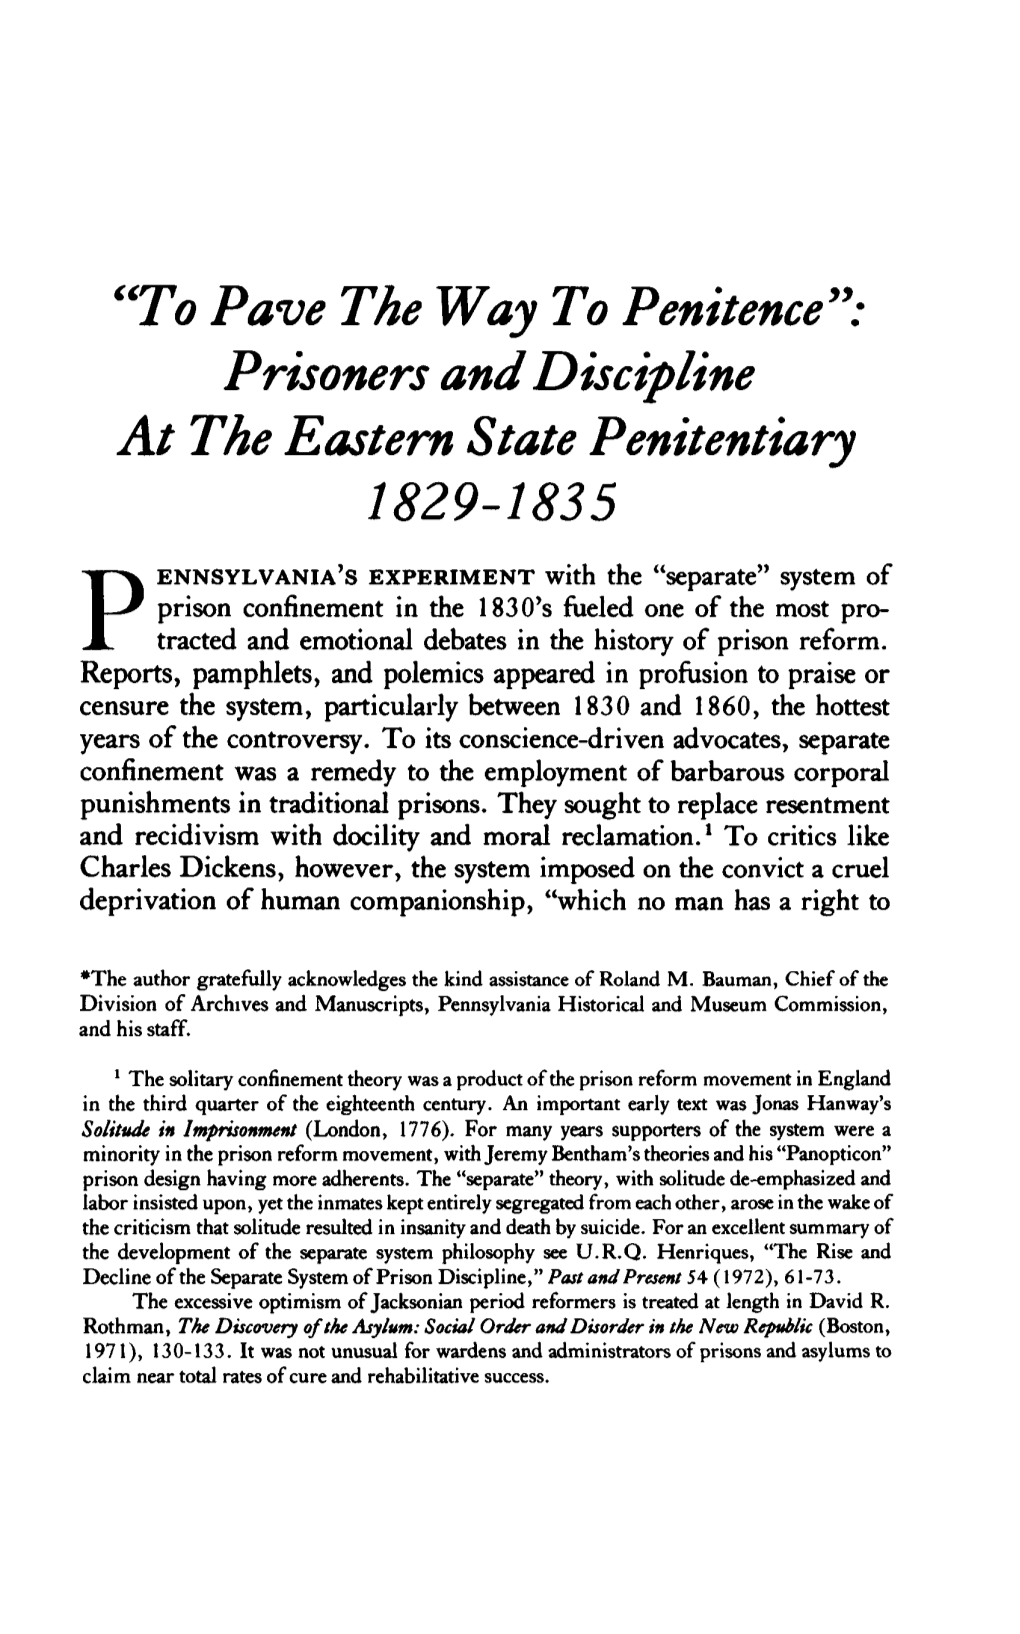 Prisoners and Discipline at the Eastern State Penitentiary 1829-1835